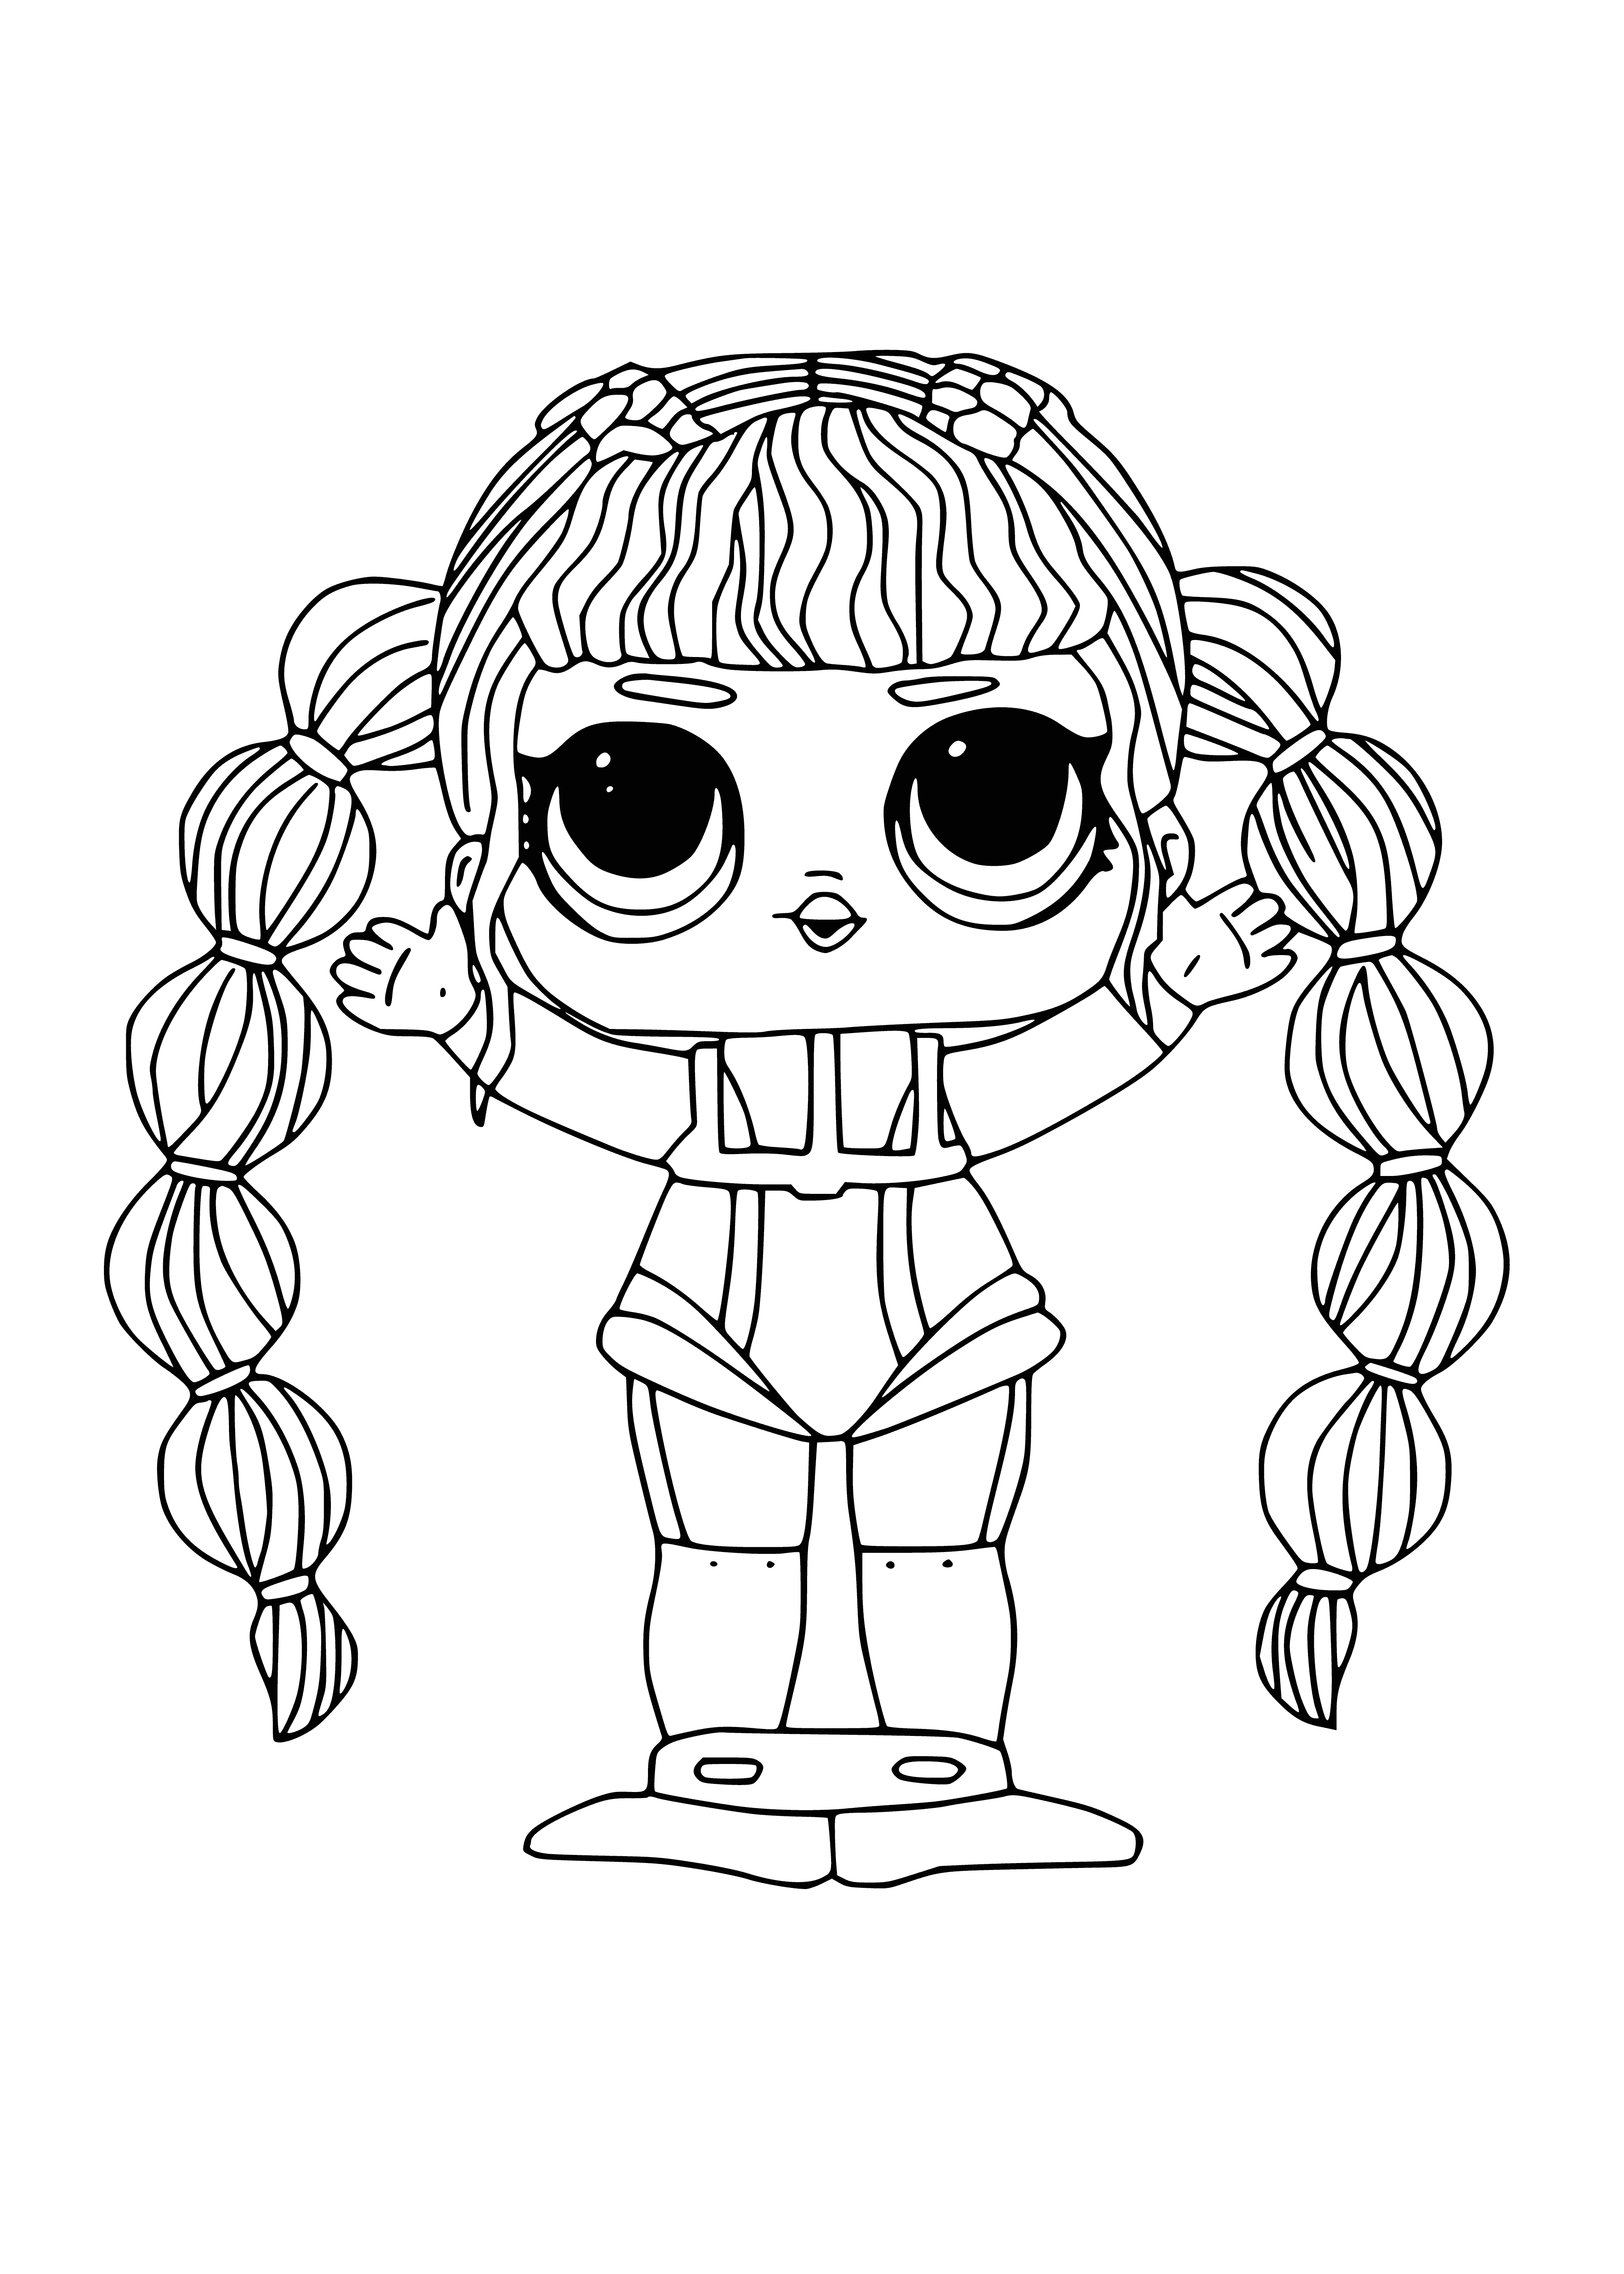 coloring page: Young woman in scuba gear emerges from water with red LOL doll, smiling and happy. Long blonde hair, white tank top and blue shorts.